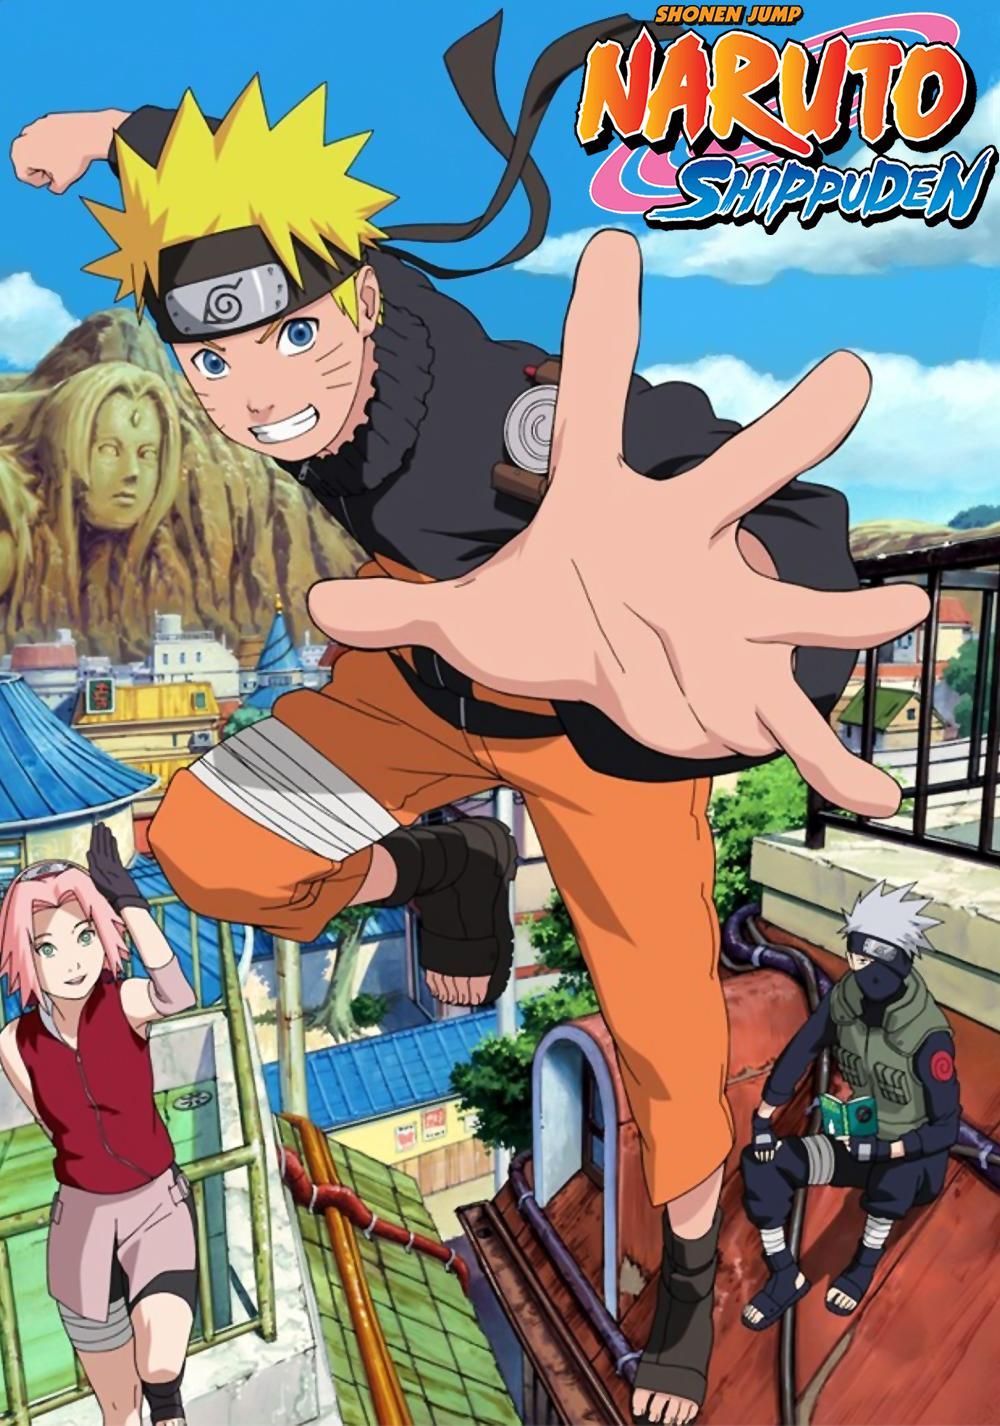 How To Watch 'Naruto' Arcs in Order Without Filler Episodes